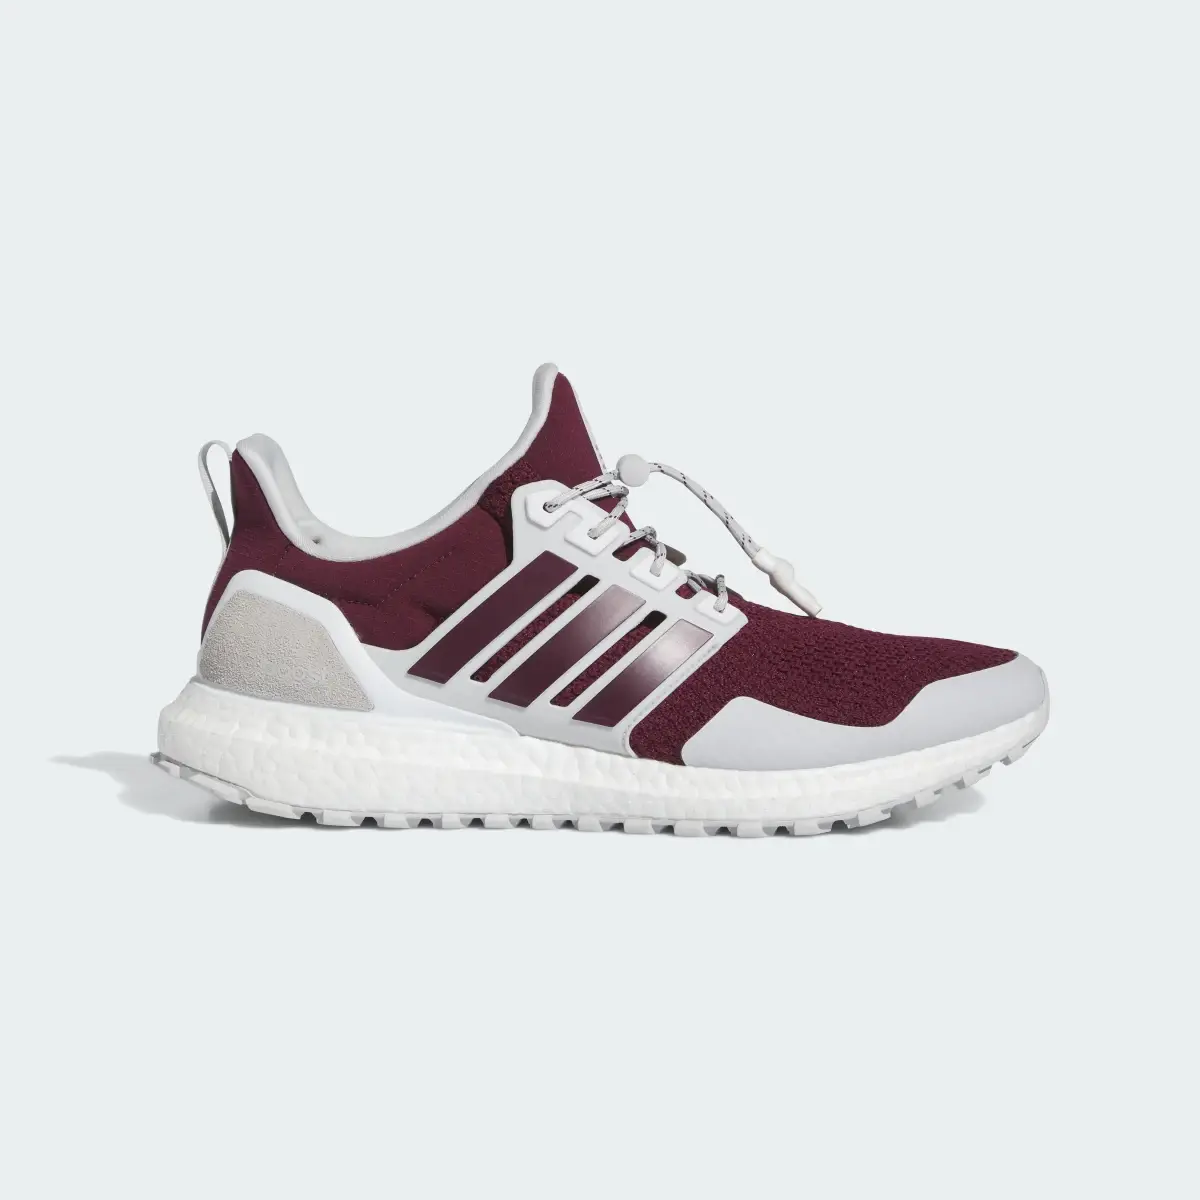 Adidas Mississippi State Ultraboost 1.0 Shoes. 2